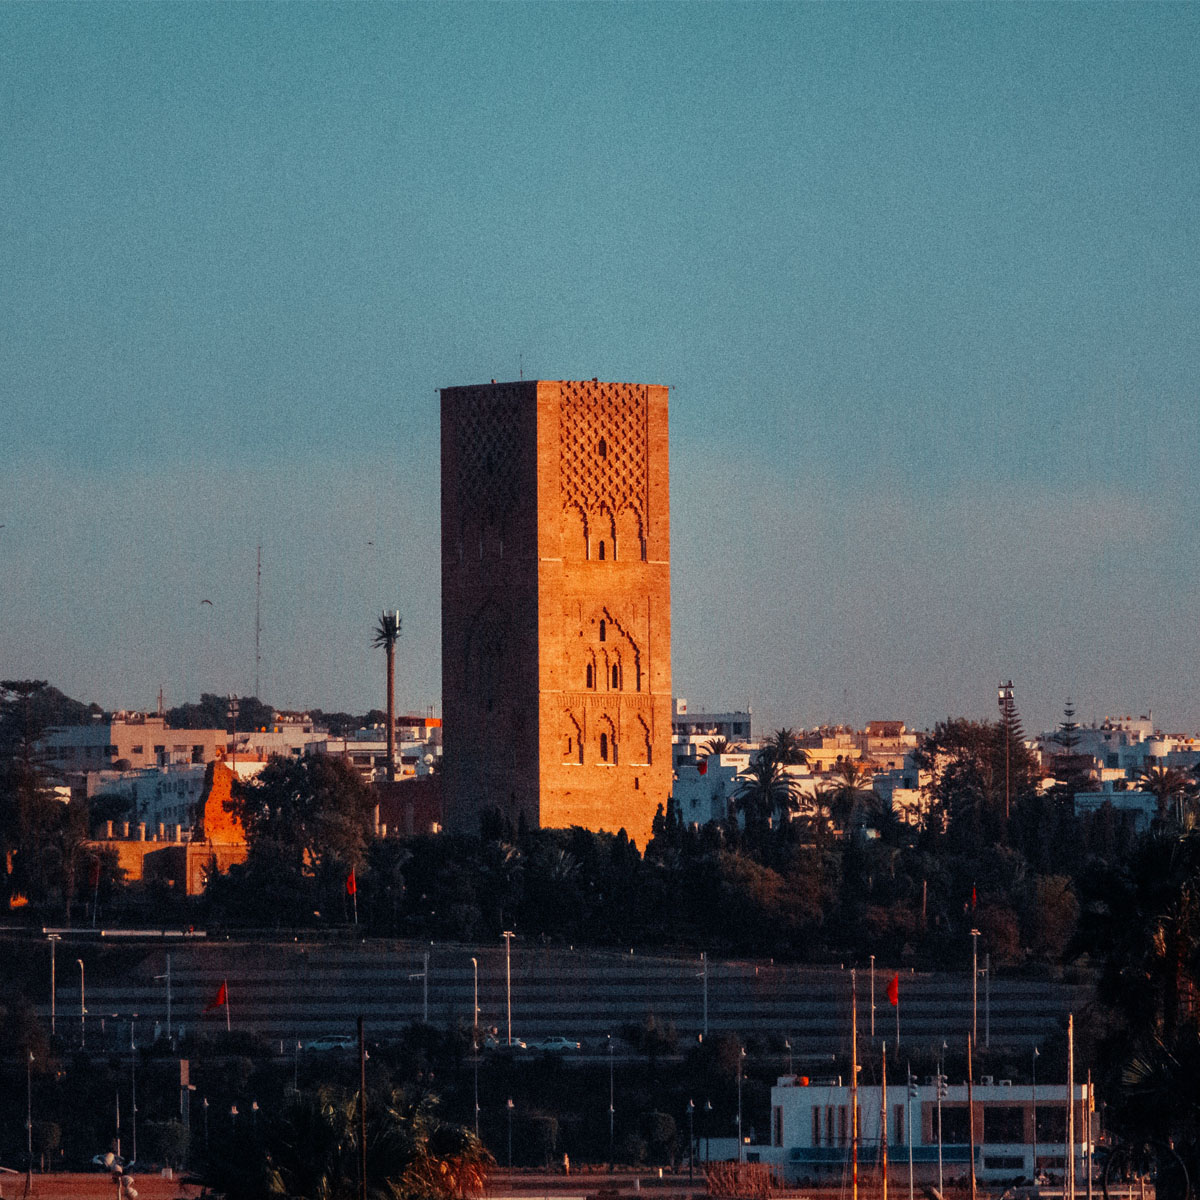 Marvel at the Magnificent Hassan II Tower in Rabat: A Symbol of Morocco's Rich Heritage. This image is of a tall brick tower in the middle of Rabat. The tower stands out against the blue sky and there are trees and buildings in the background.